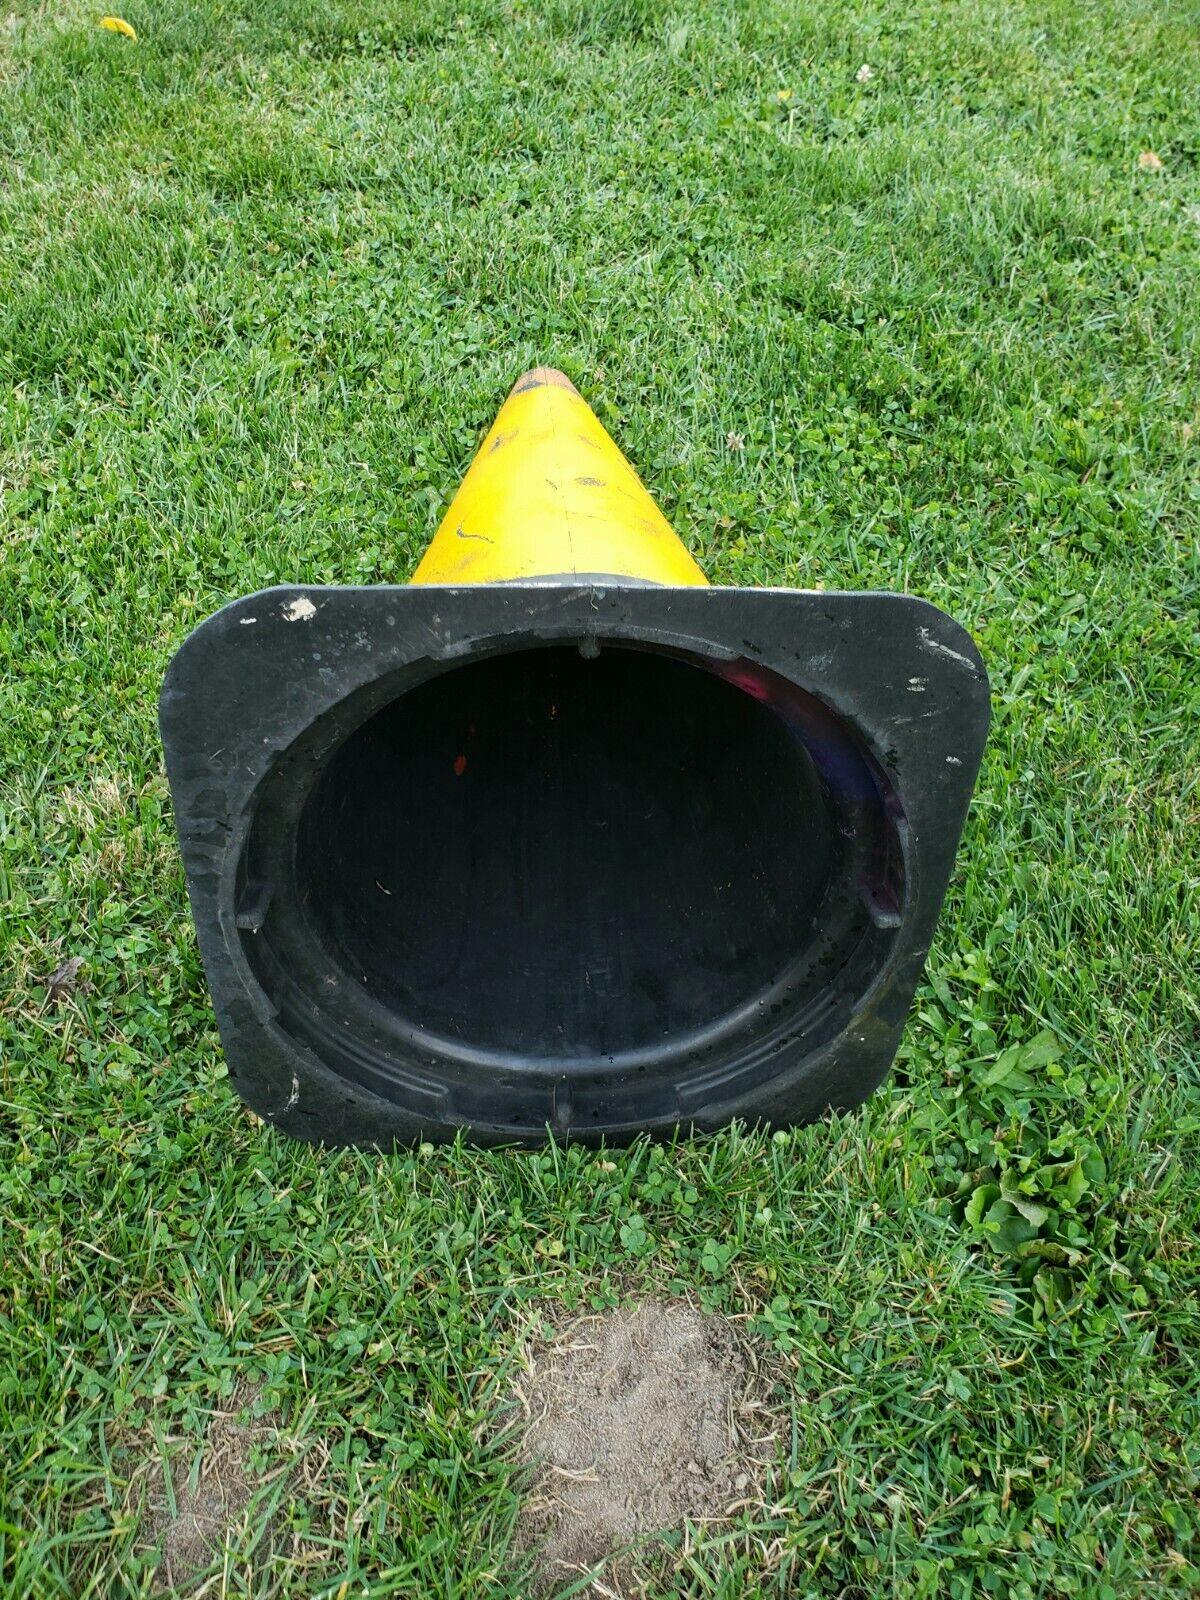 28-Inch Traffic Cone Road Safety Marker Interstate Rubber California Antique bottom